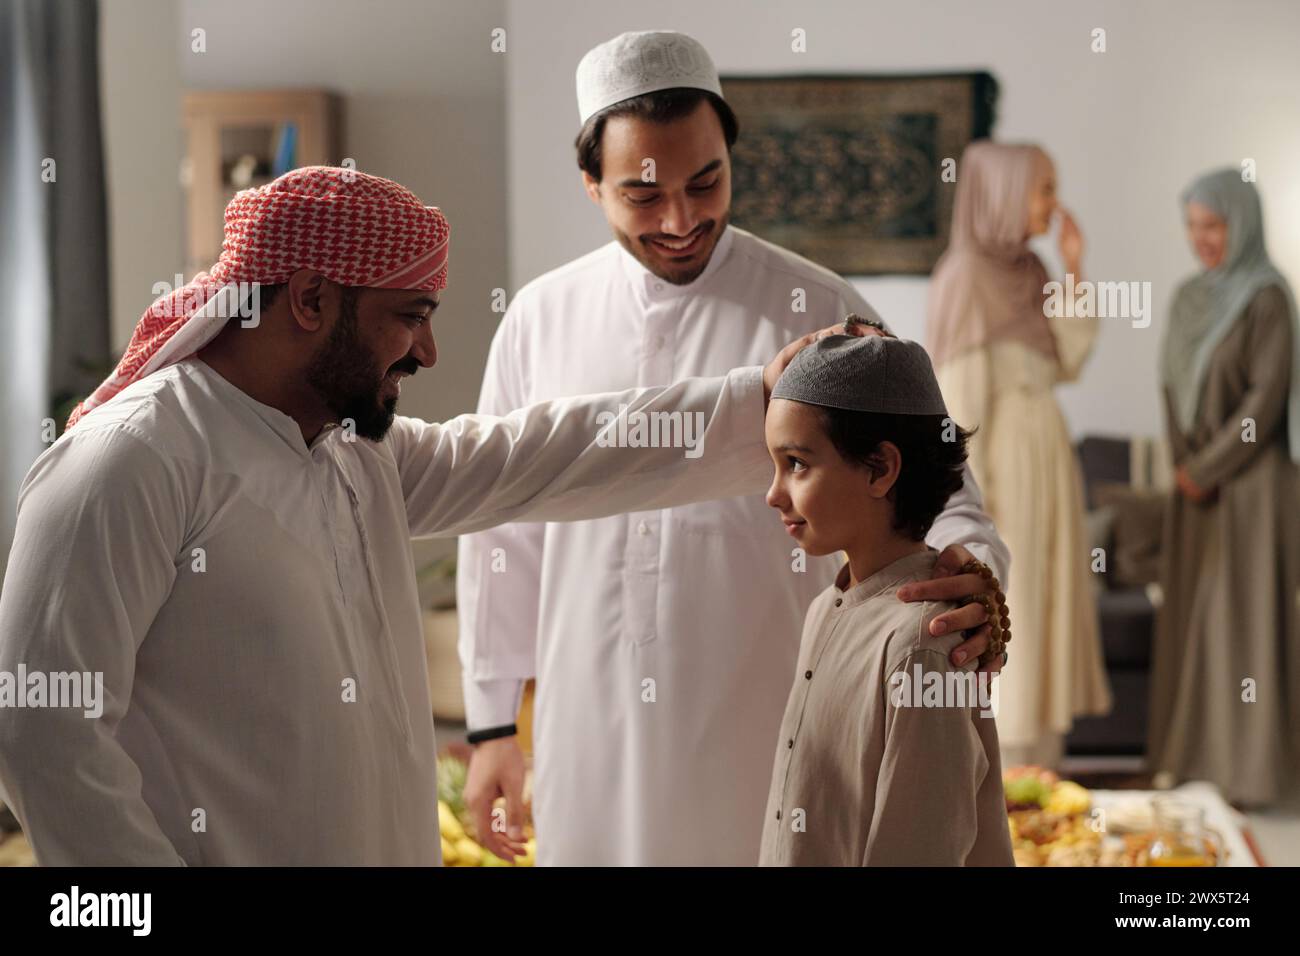 Cheerful bearded Middle Eastern man patting his nephew on head at family gathering on Uraza Bayram day Stock Photo